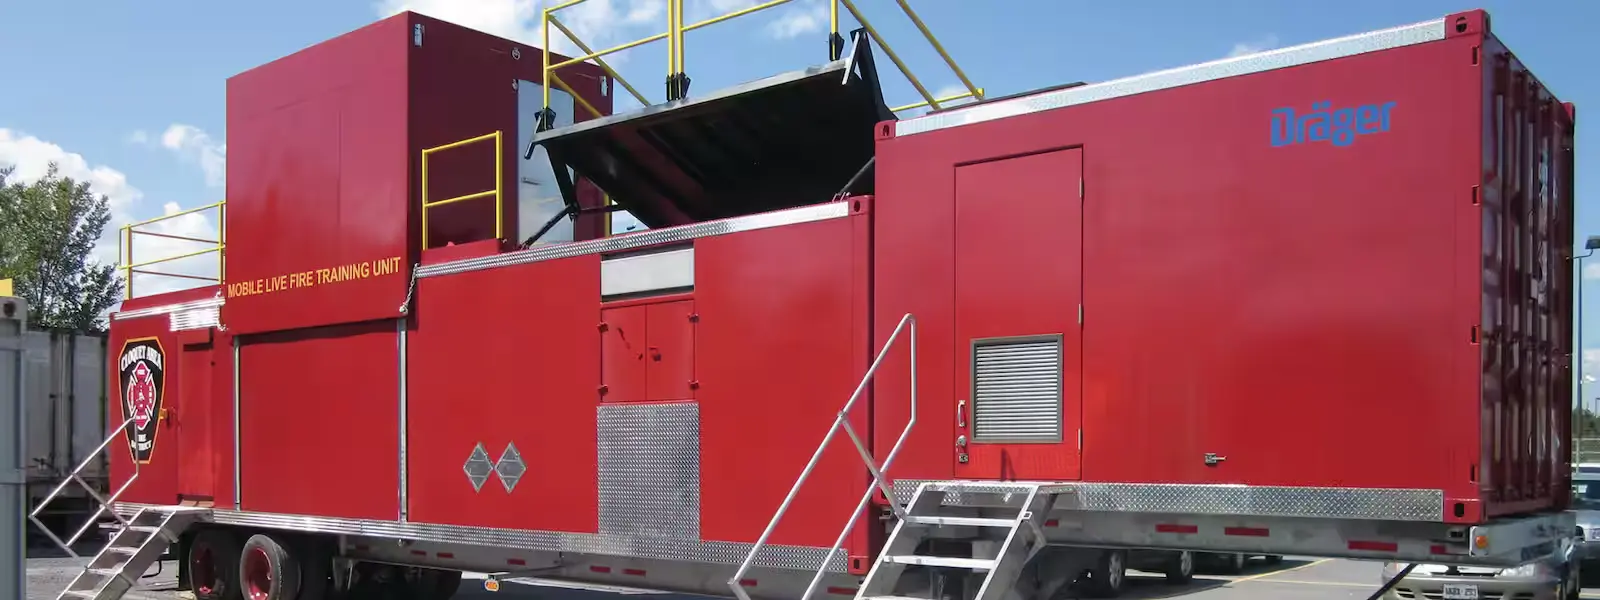 draeger mobile live fire training unit containerized mlftu c fire simulation systems 16 6 D 57043 2012 Mobile Live Fire Training Unit Containerized (MLFTU-C)